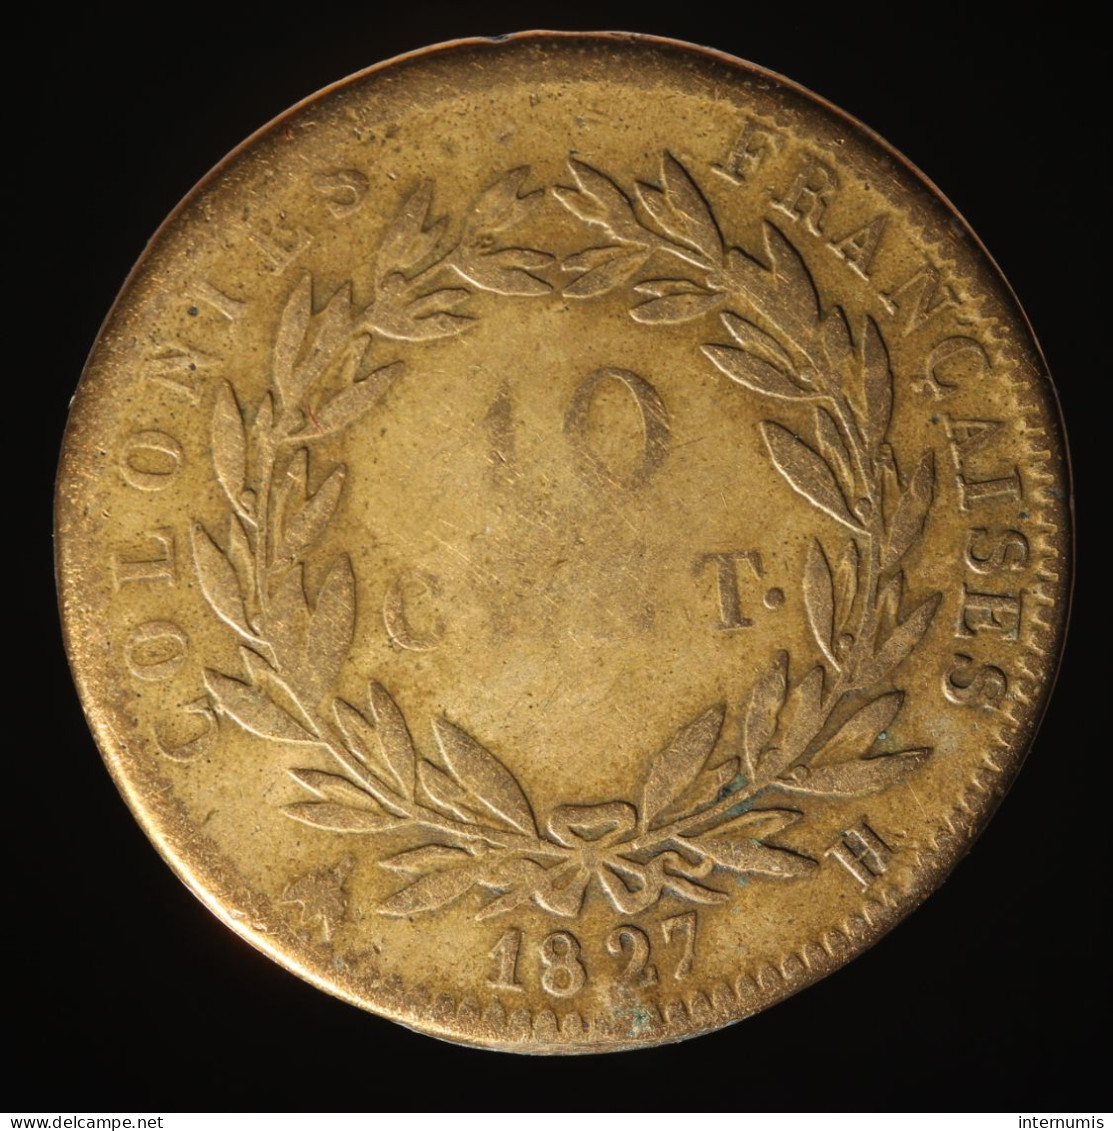  France, Charles X, 10 Centimes, 1827, La Rochelle, Bronze, TB (F),
KM#11.2, Lec.305 - French Colonies (1817-1844)